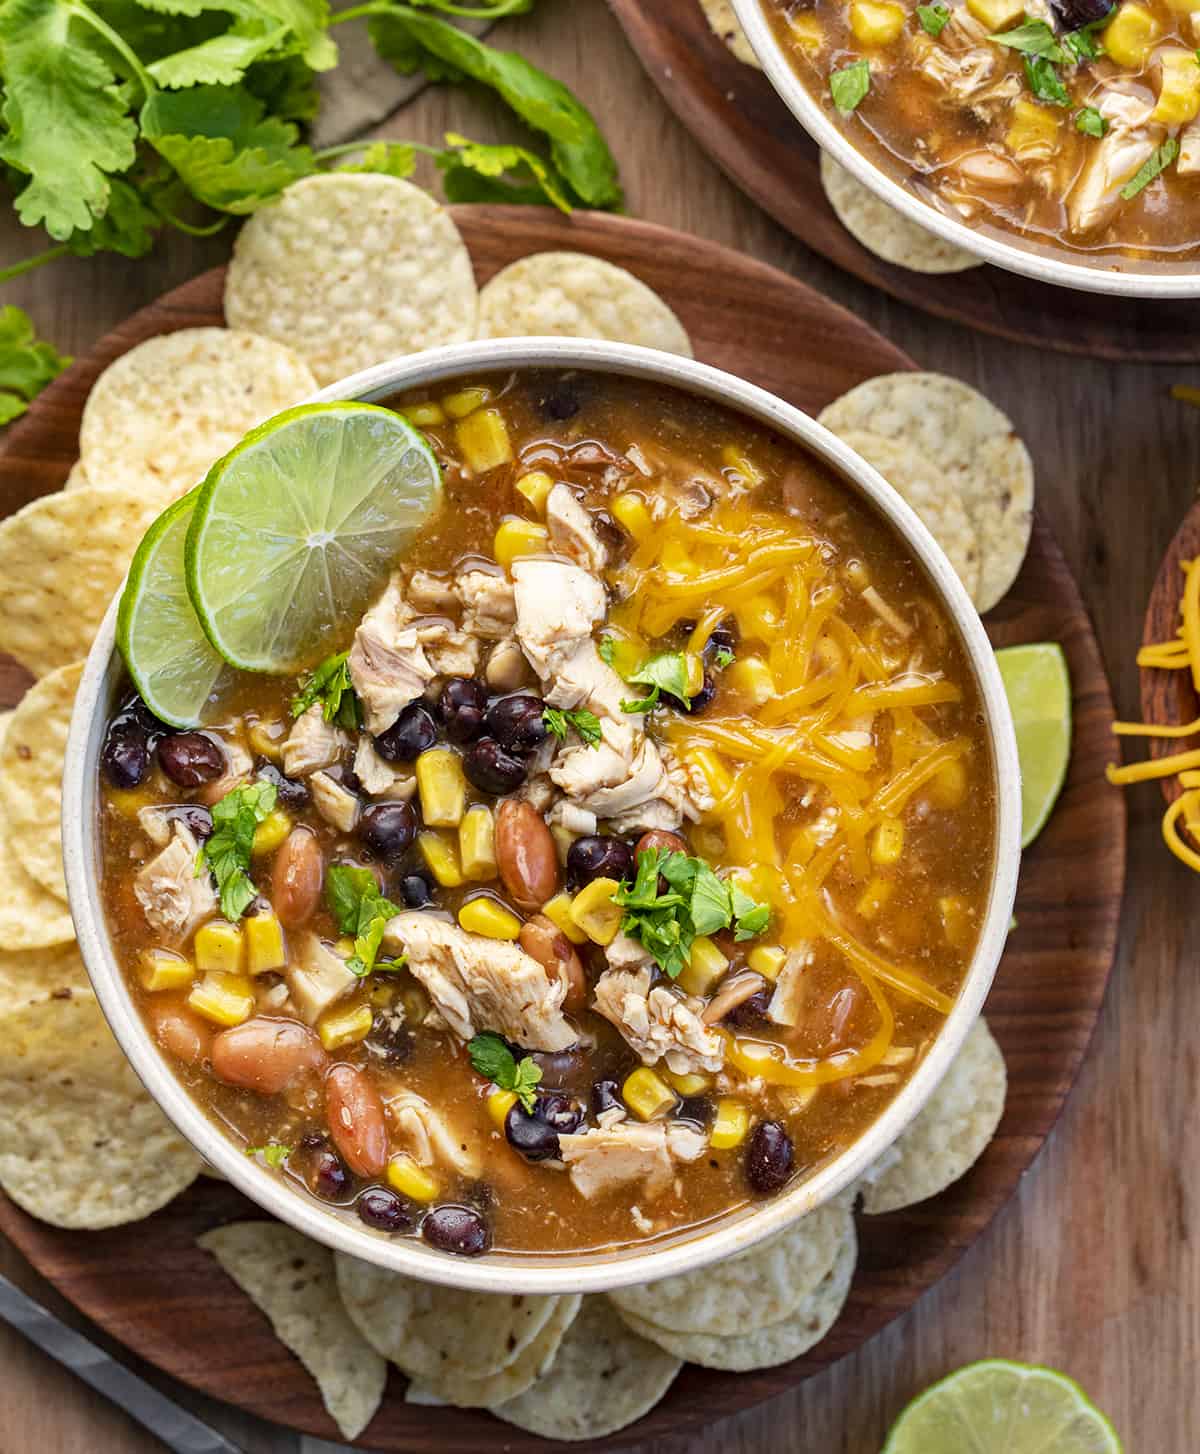 Bowl of 7 Can Chicken Taco Soup from Overhead with Chips and Cheese nearby. Soup, Summer Soups, Easy Soups, Cheap Soup Recipes, Simple Soups, Chicken Taco Soup, Mexican Soup, Appetizer, Tortilla Chips, Thick Soups, Dinner, Chicken Recipes, recipes, i am homesteader, iamhomesteader